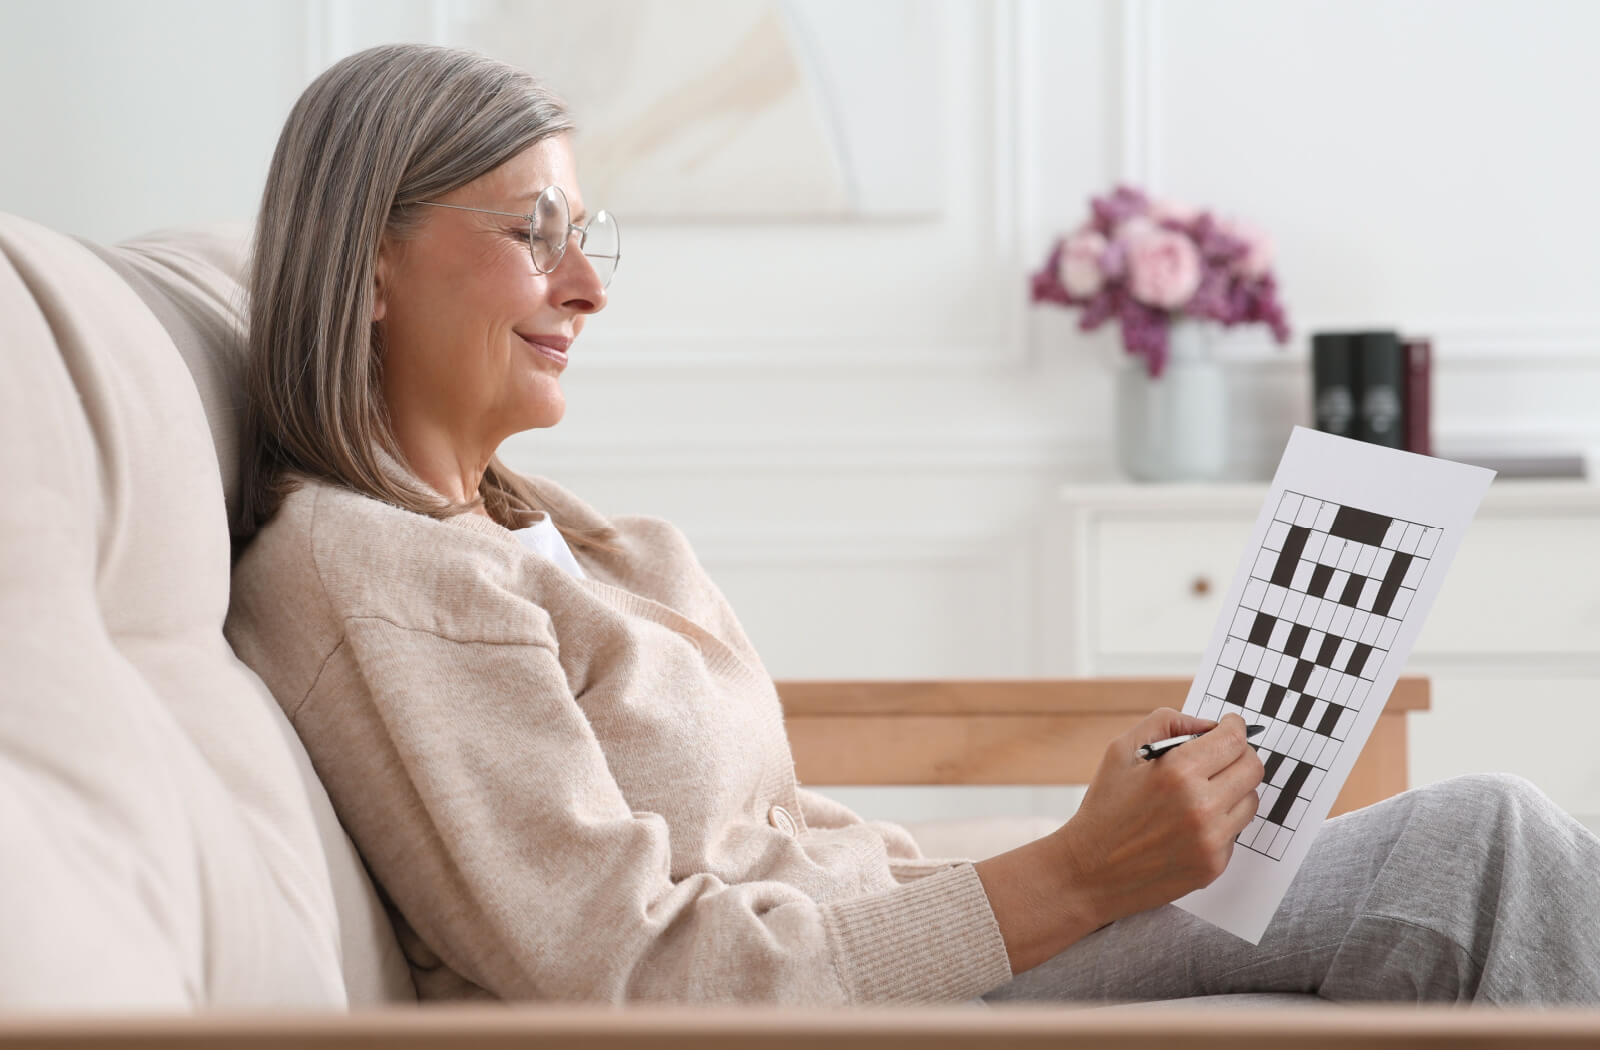 An older adult woman solving a crossword puzzle